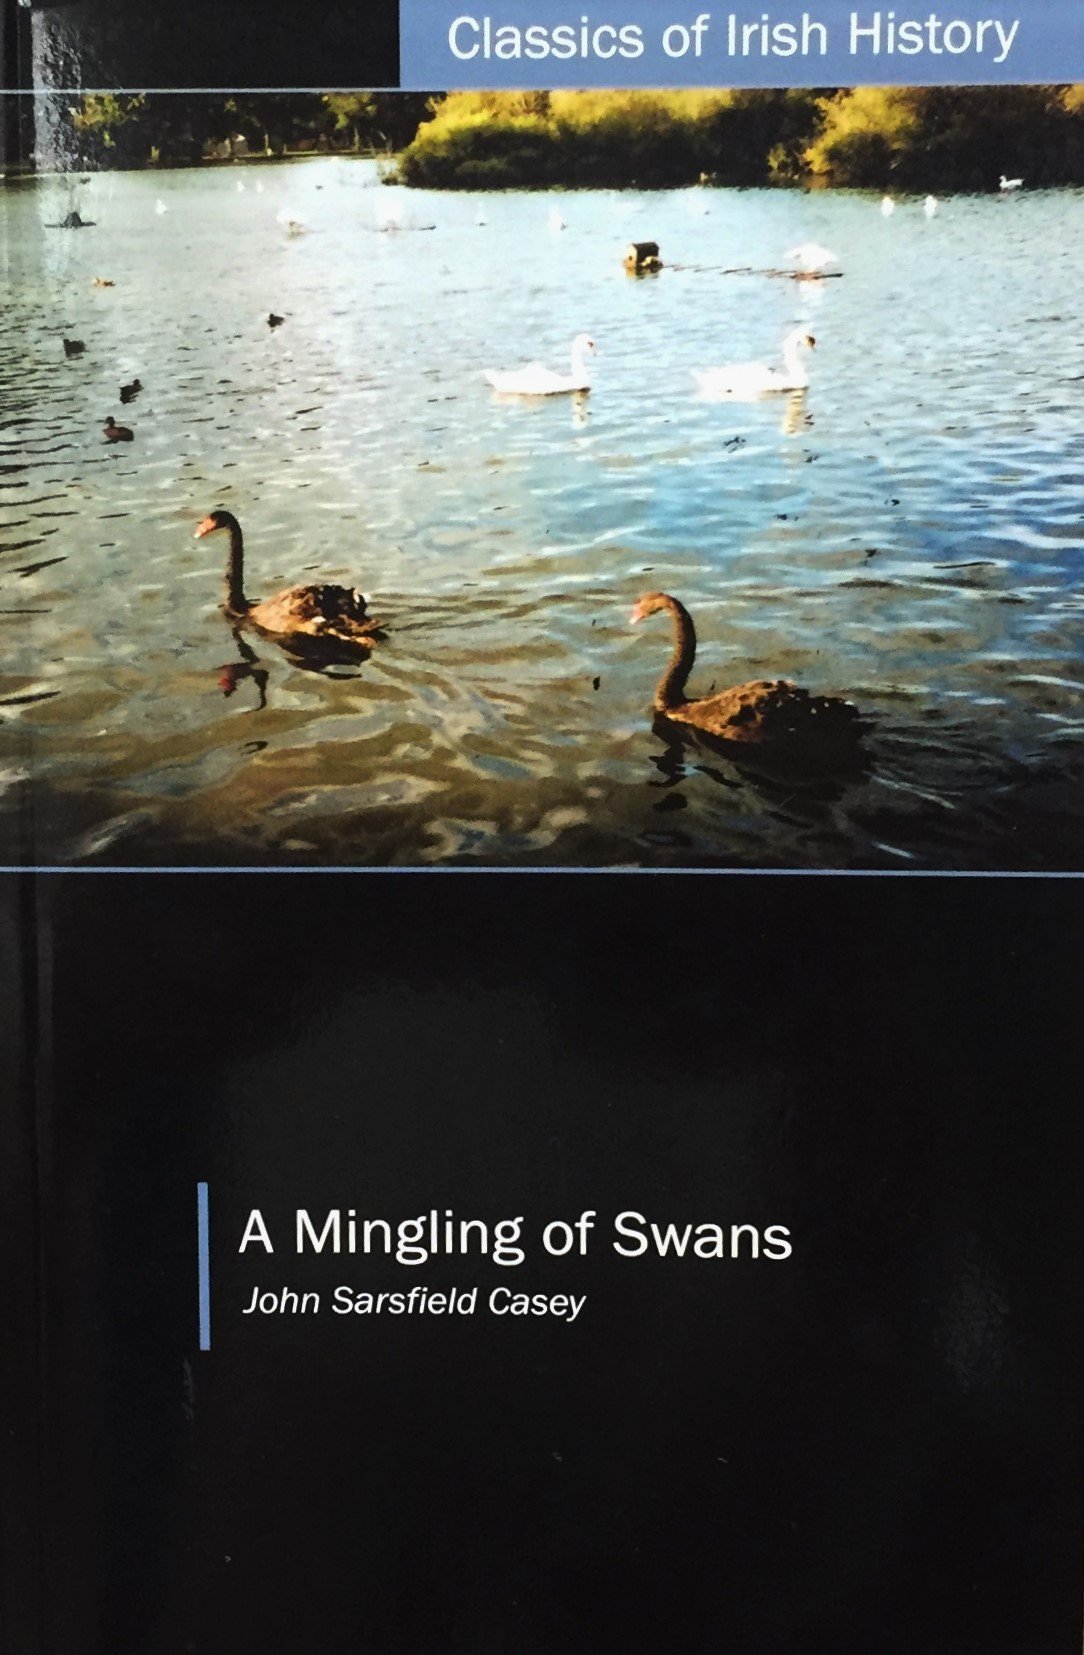 A book cover with a photo of swans on the water.